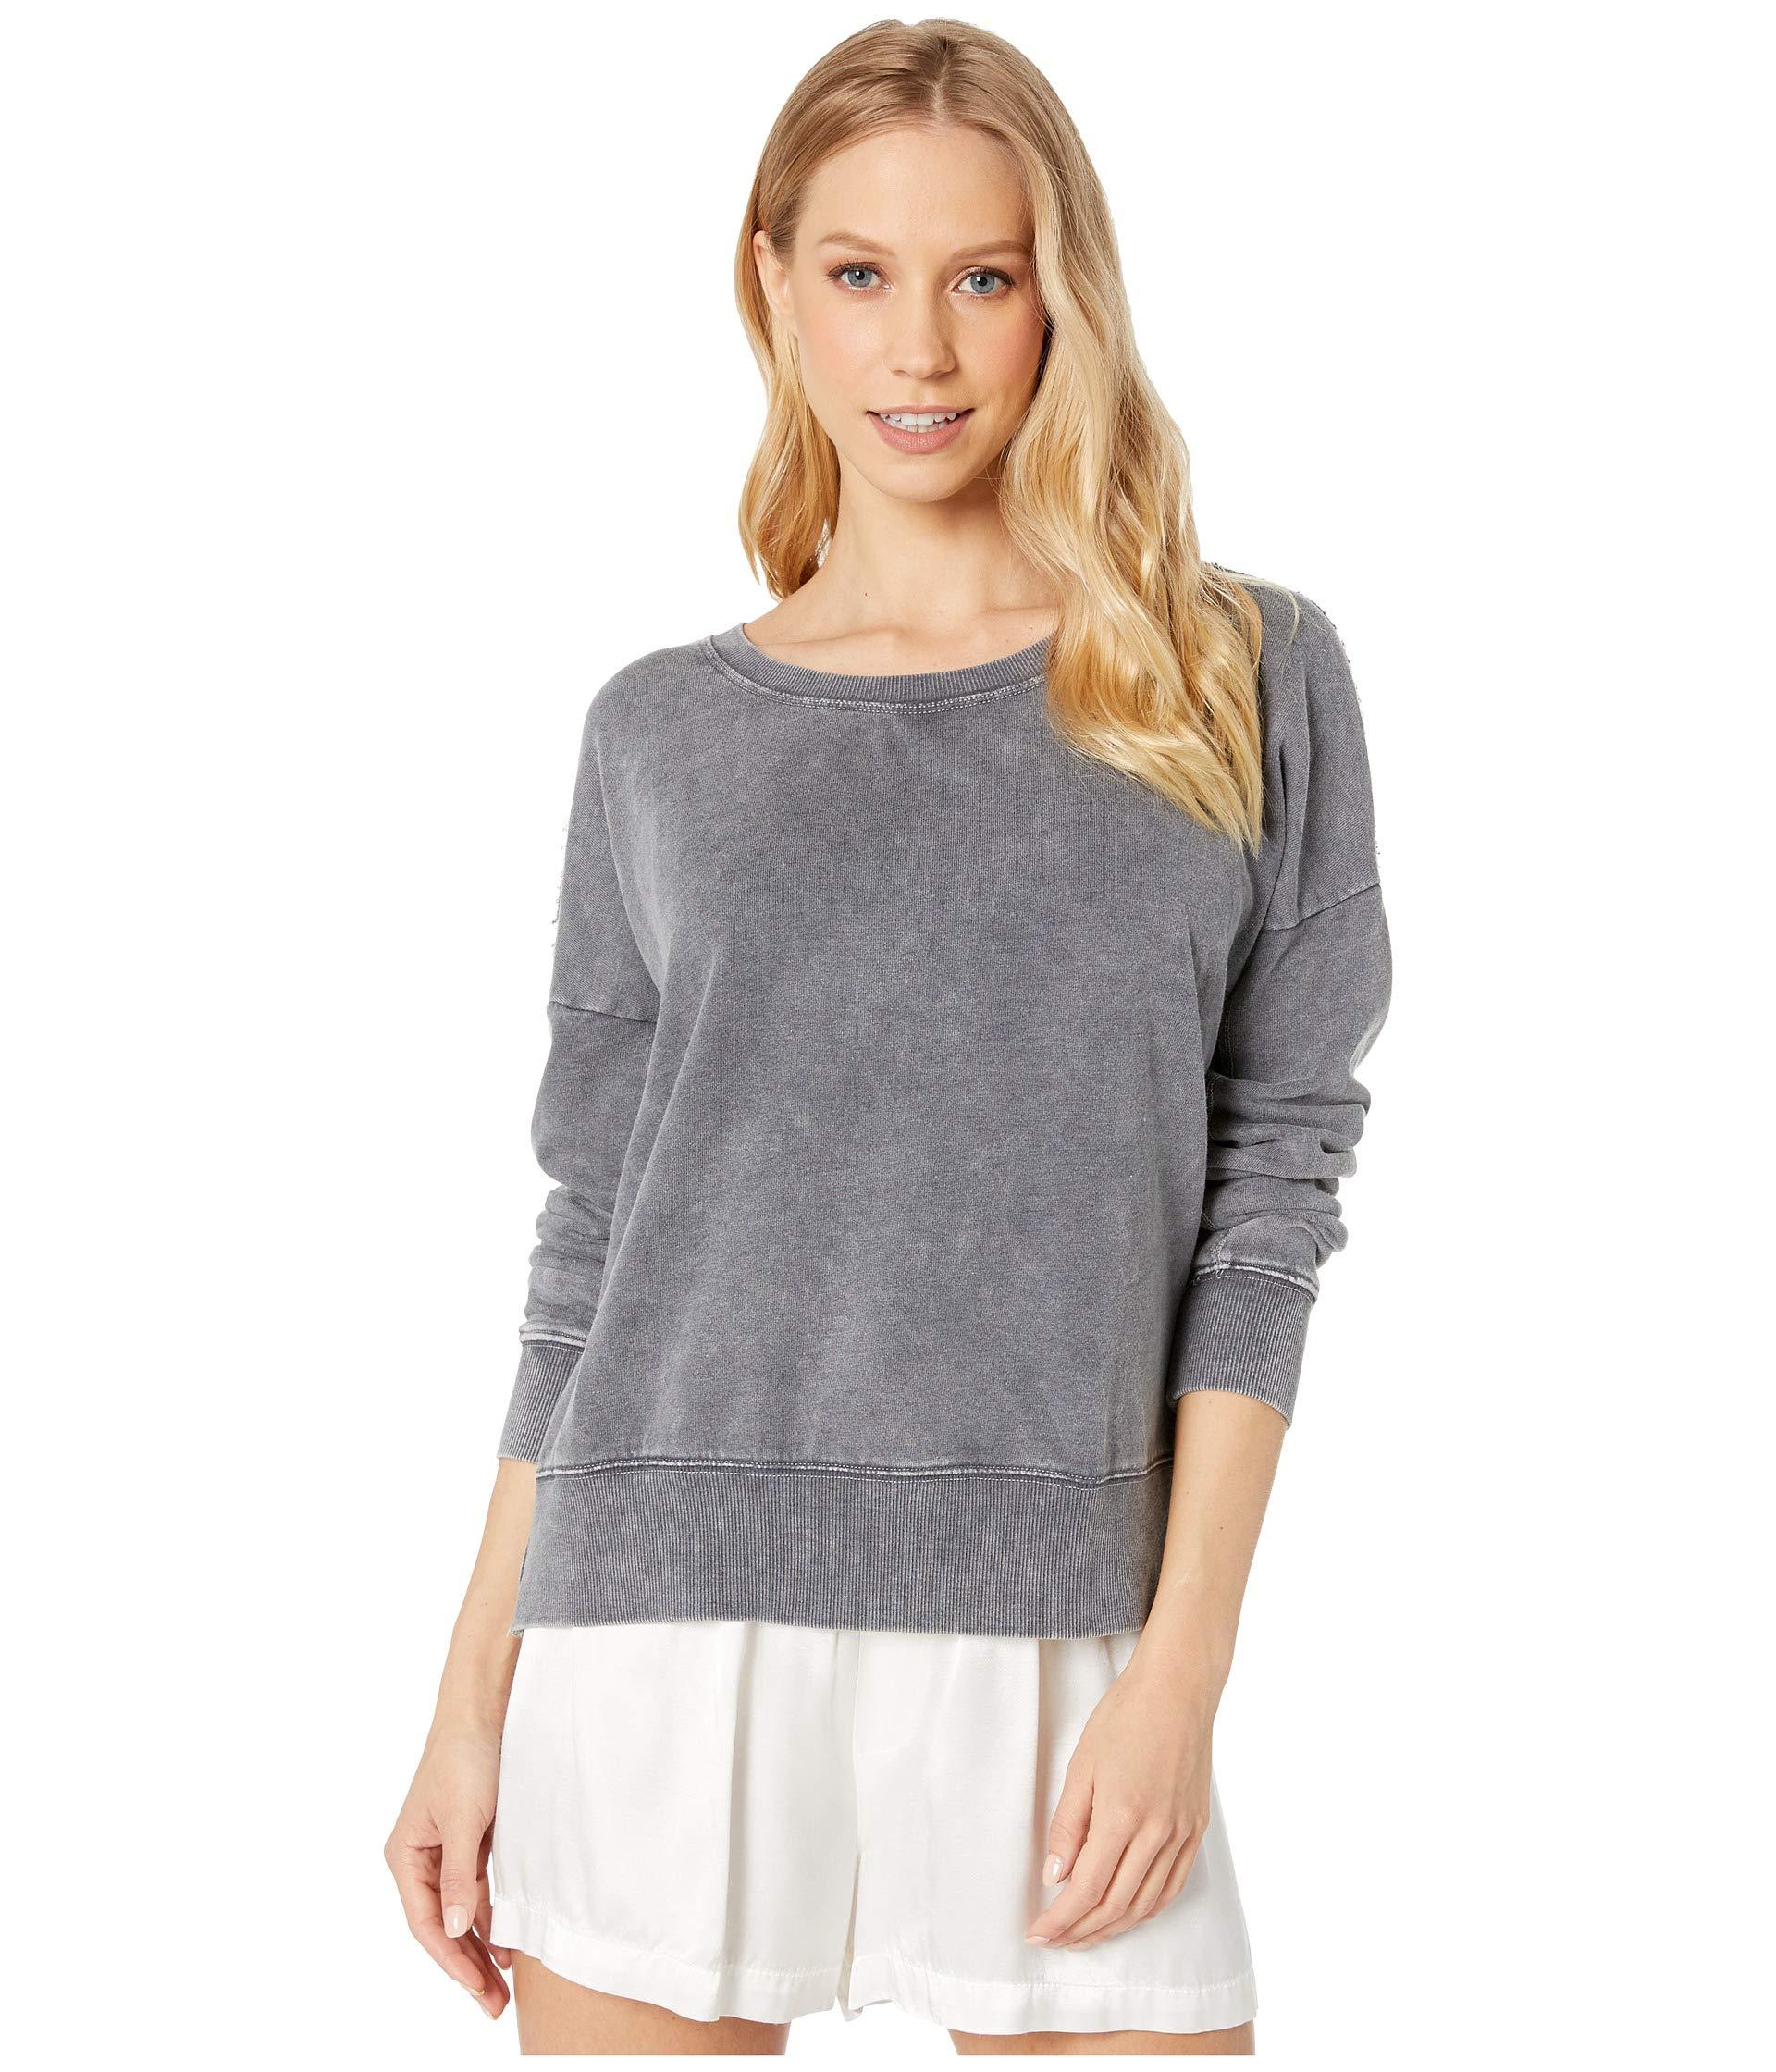 Pj Salvage Cotton Rock And Roll Sweater in Gray - Lyst